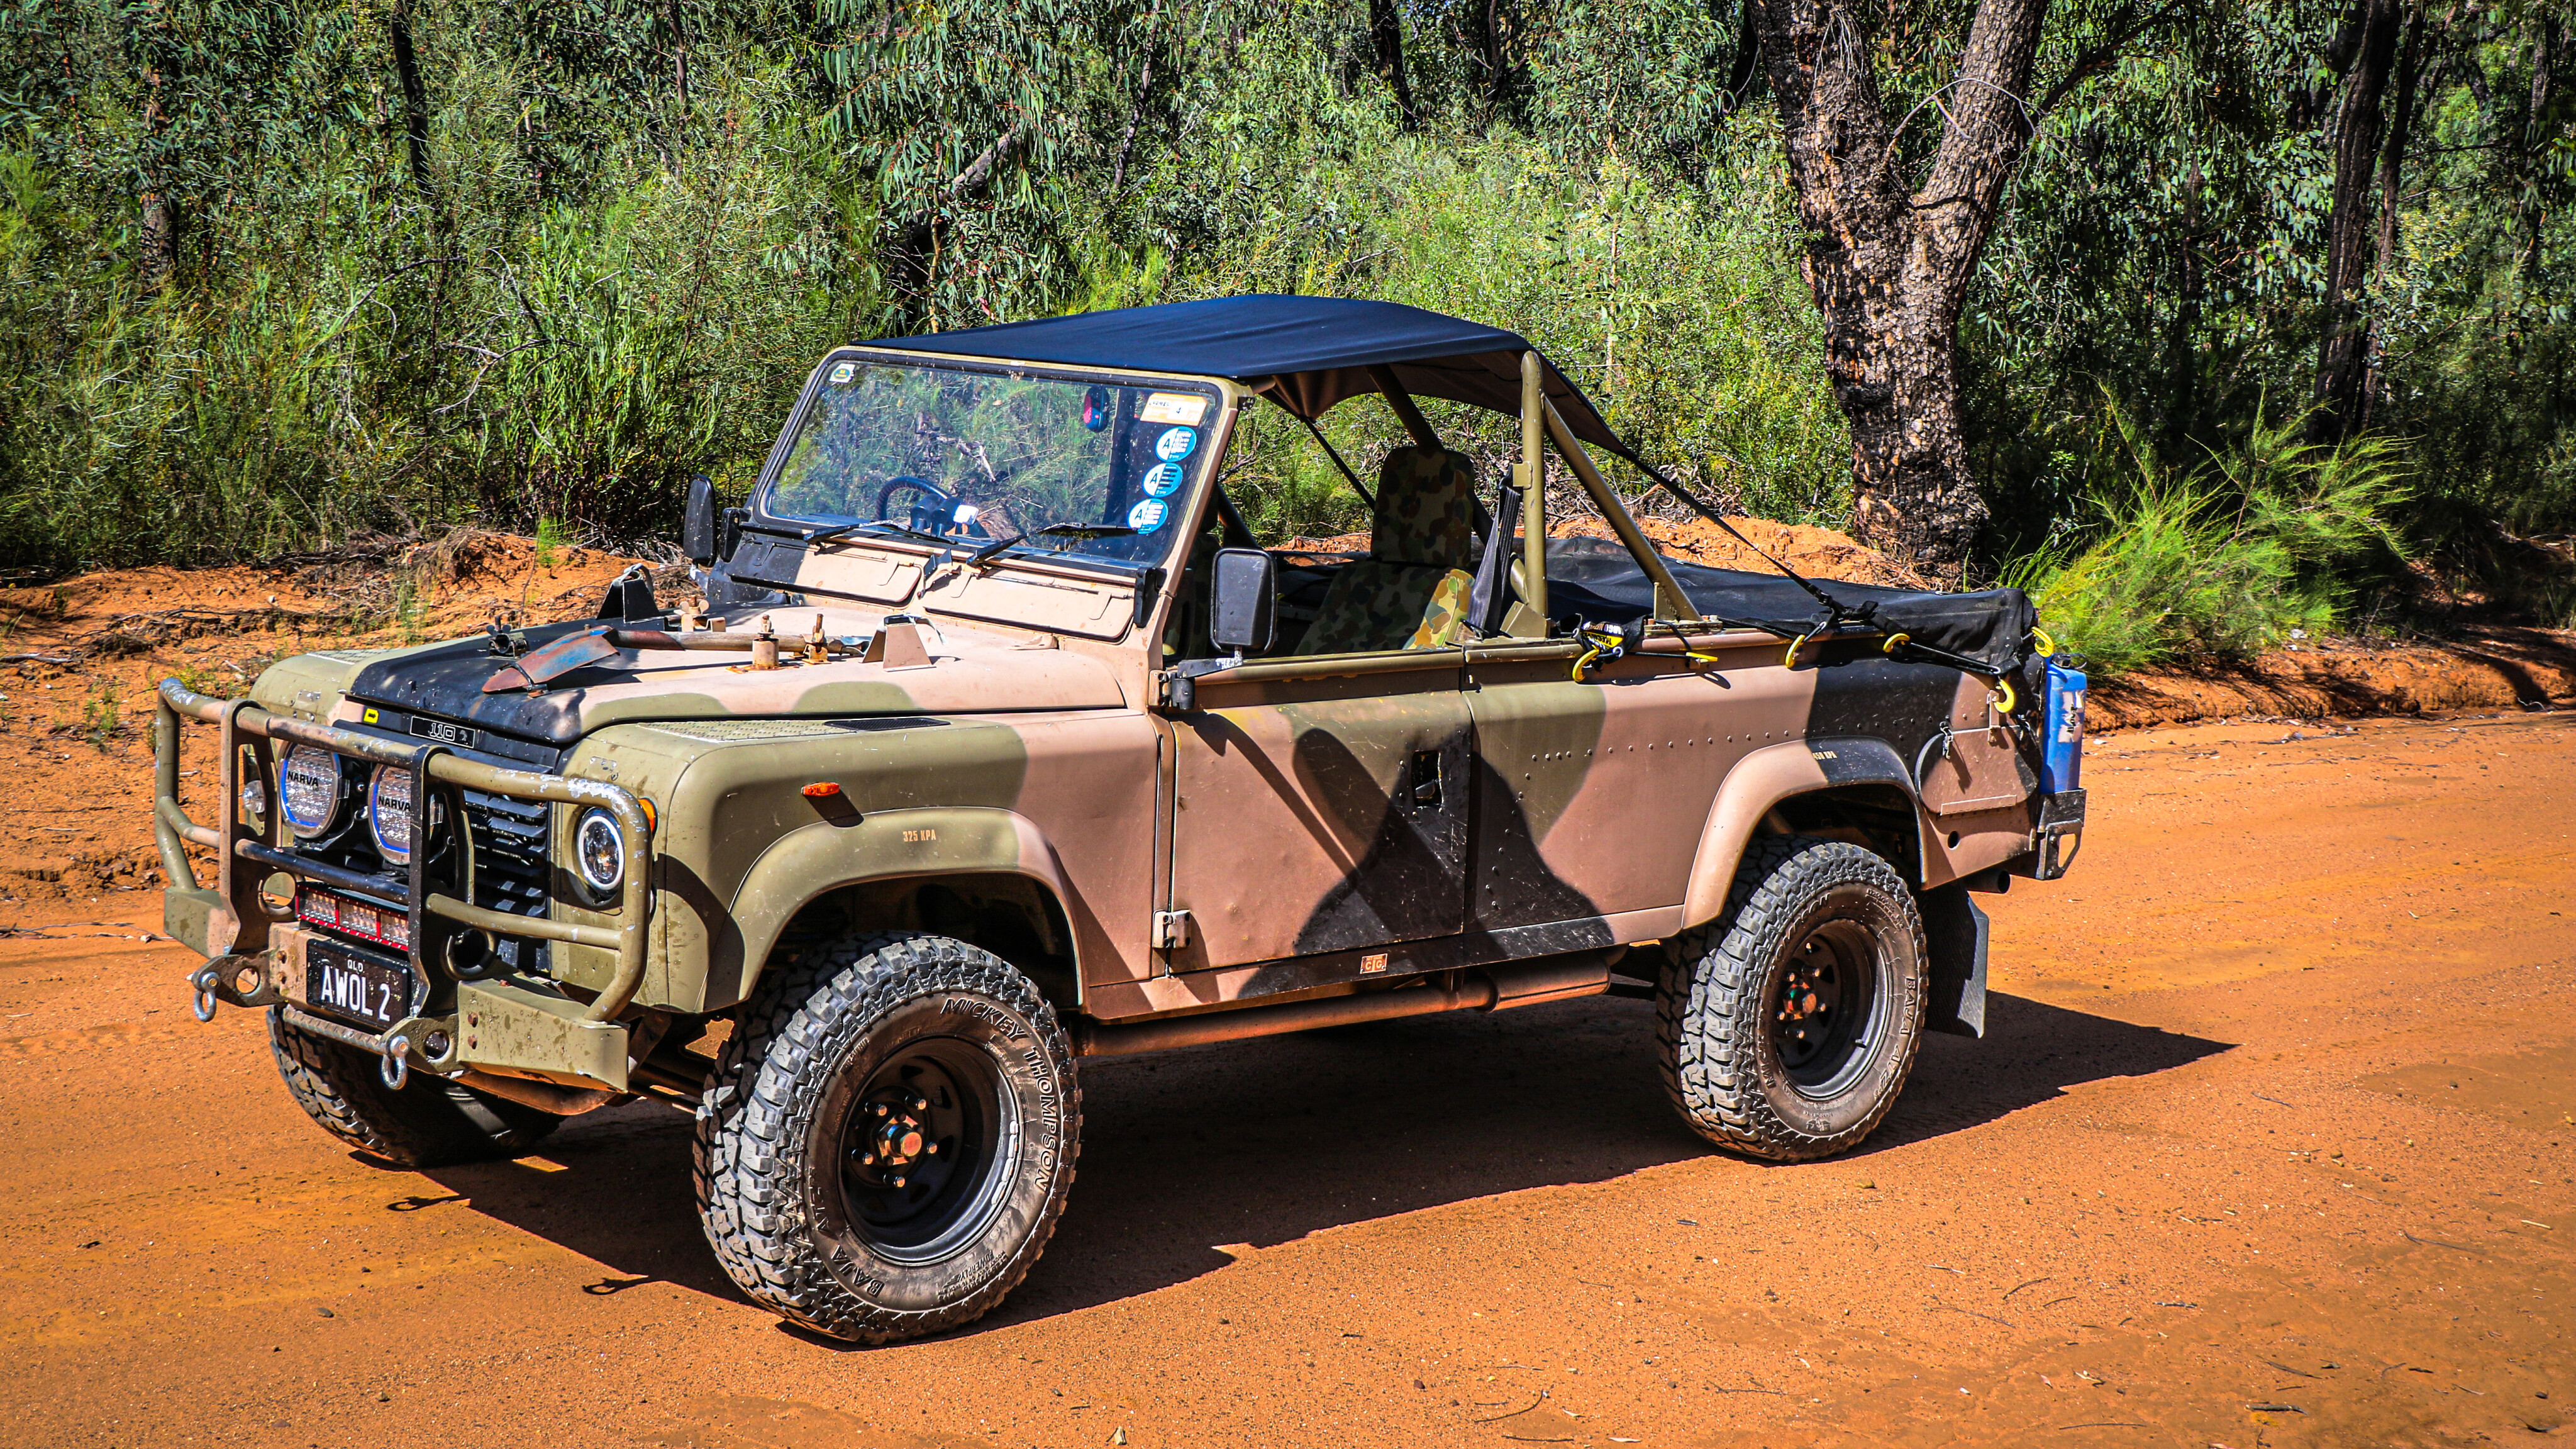 1988 Land Rover Perentie Defender 110 long-term review